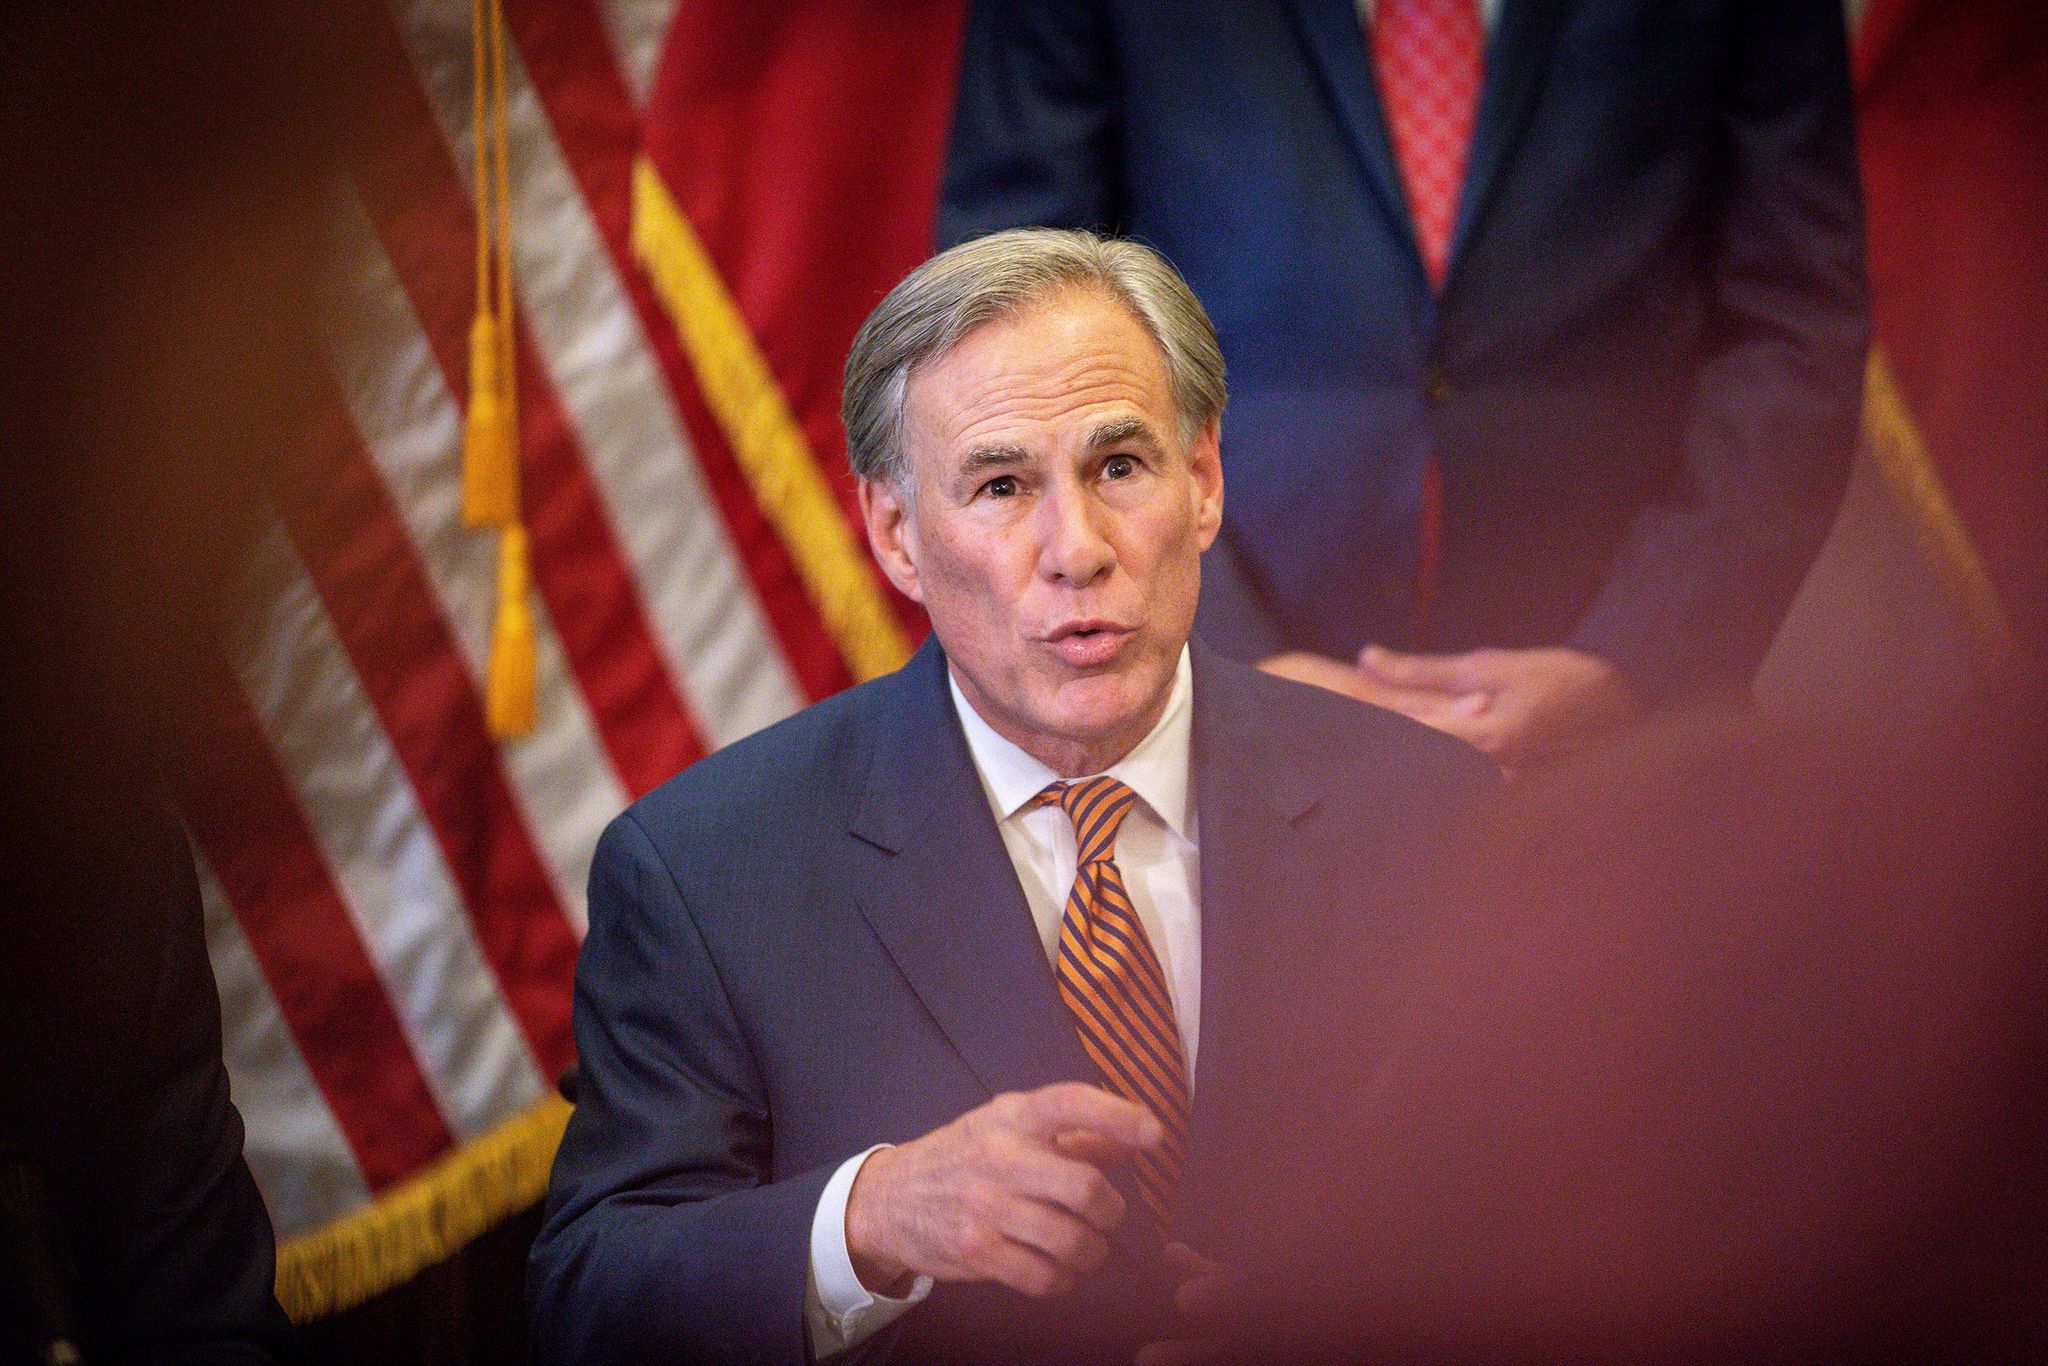 austin, tx   june 08 texas governor greg abbott speaks during a press conference where he signed senate bills 2 and 3 at the capitol on june 8, 2021 in austin, texas governor abbott signed the bills into law to reform the electric reliability council of texas and weatherize and improve the reliability of the state's power grid the bill signing comes months after a disastrous february winter storm that caused widespread power outages and left dozens of texans dead photo by montinique monroegetty images